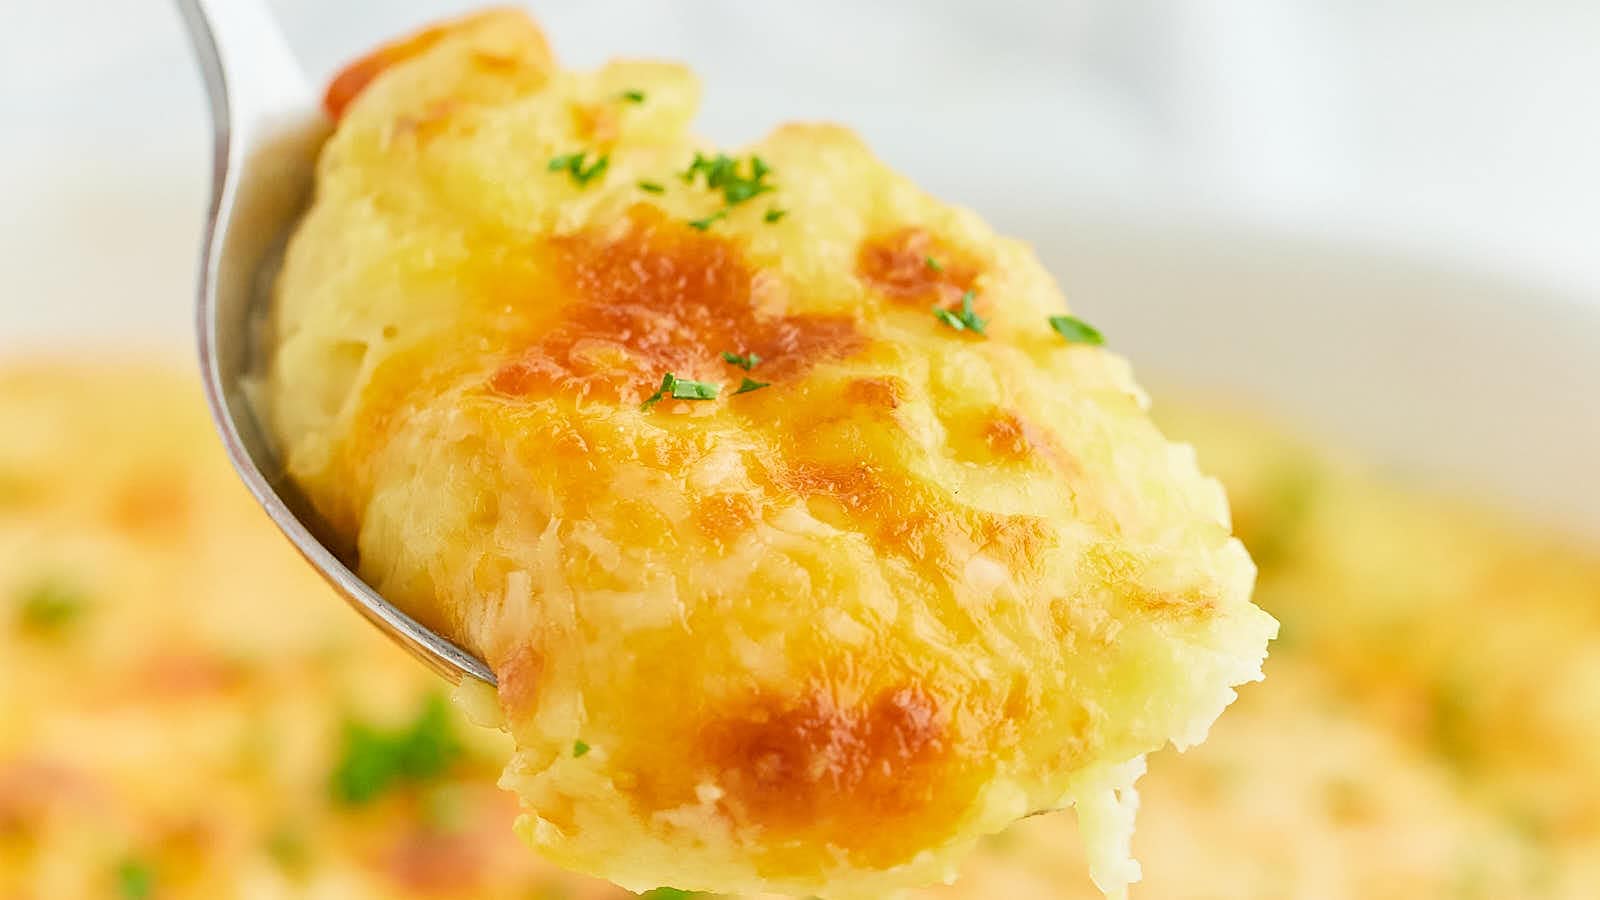 Cheesy Mashed Potatoes recipe by Cheerful Cook.